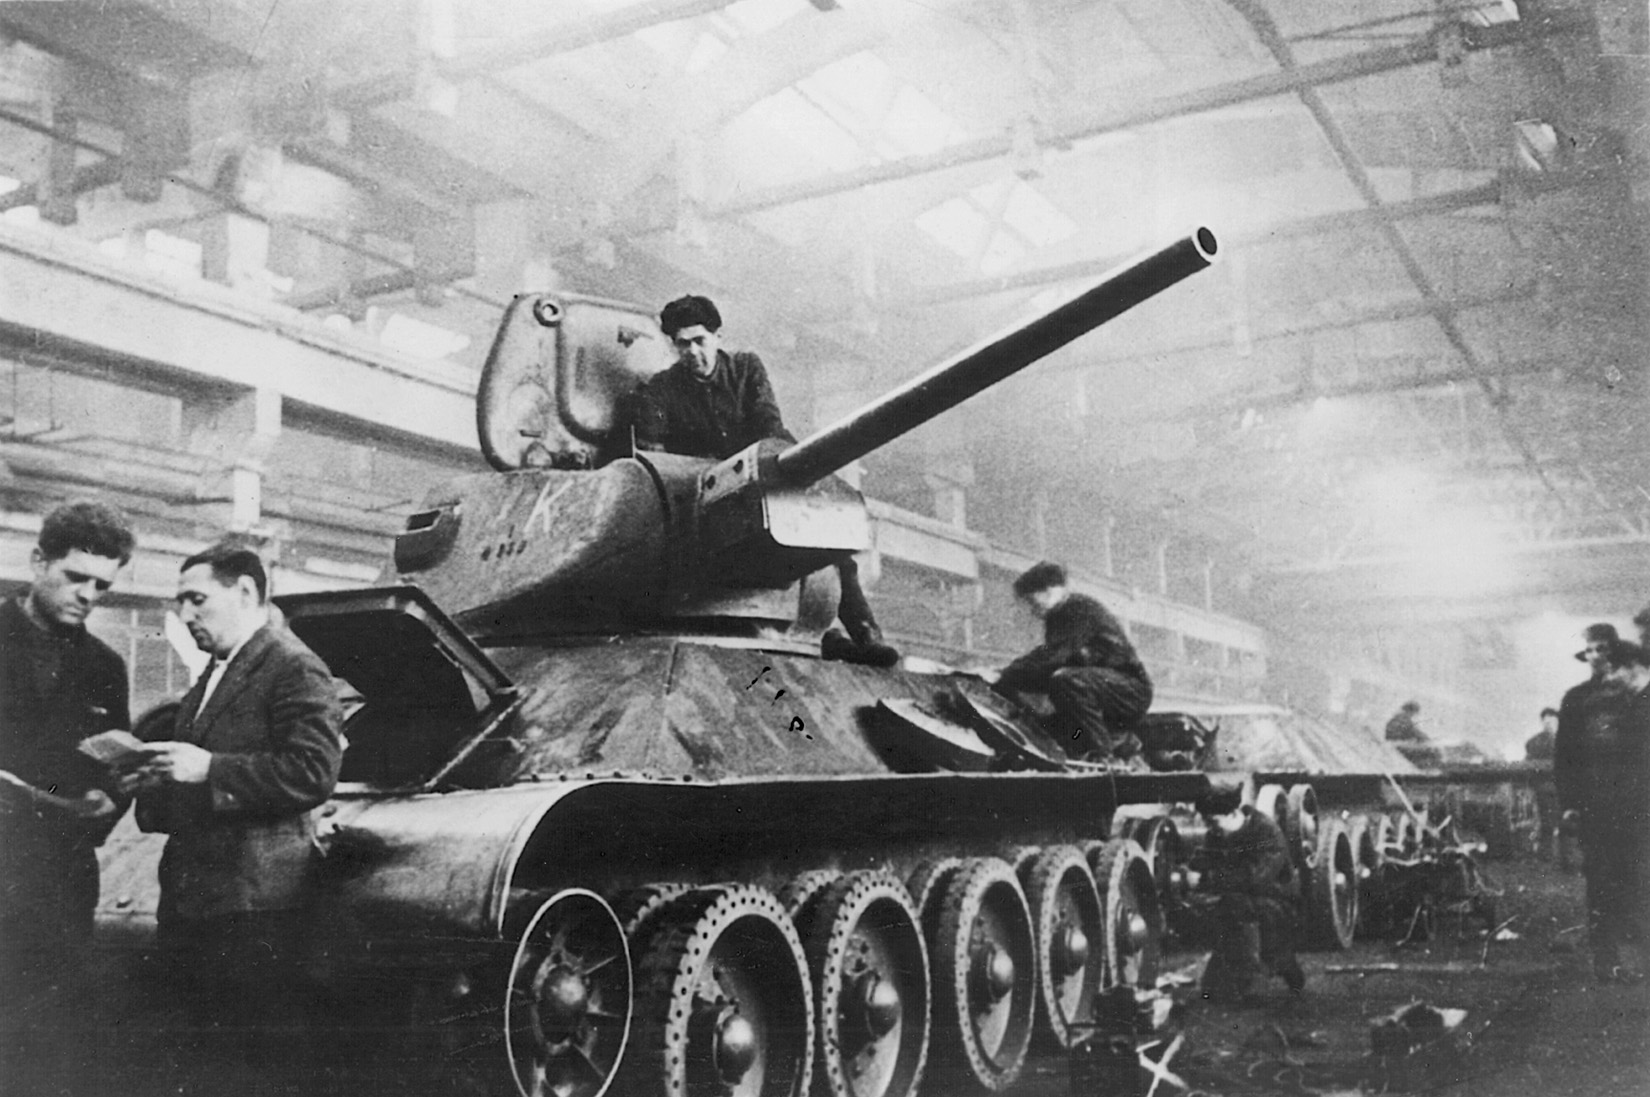 Workers make final adjustments to the turret and chassis of a new T-34 medium tank. Many of these stalwart fighting vehicles were driven straight from the factory into combat.